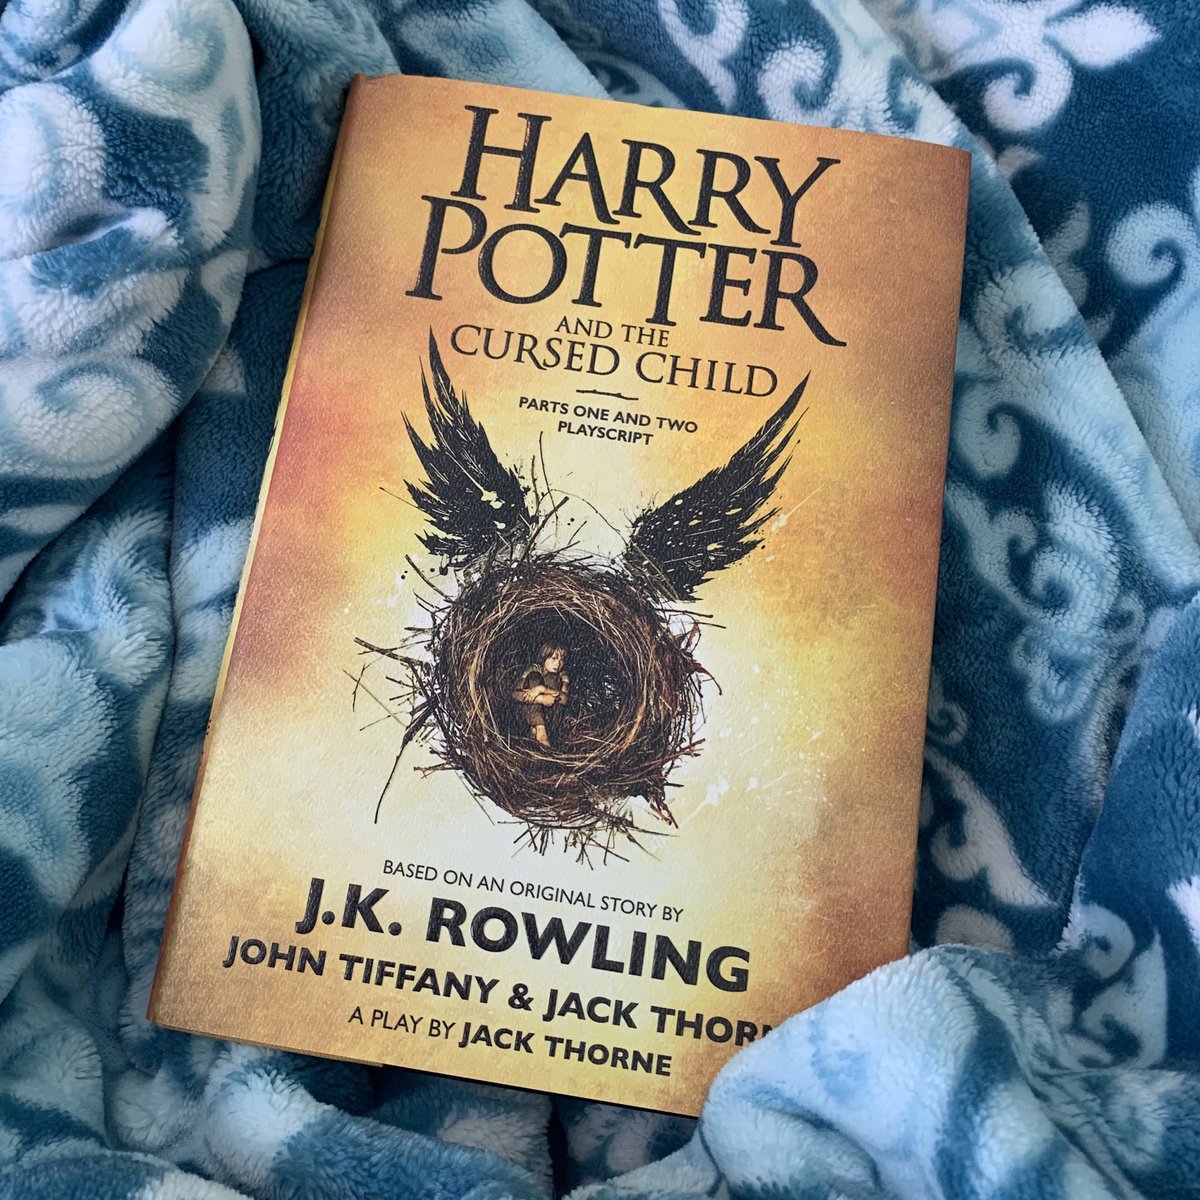 Detail Buku Harry Potter And The Cursed Child Versi Indonesia Nomer 27